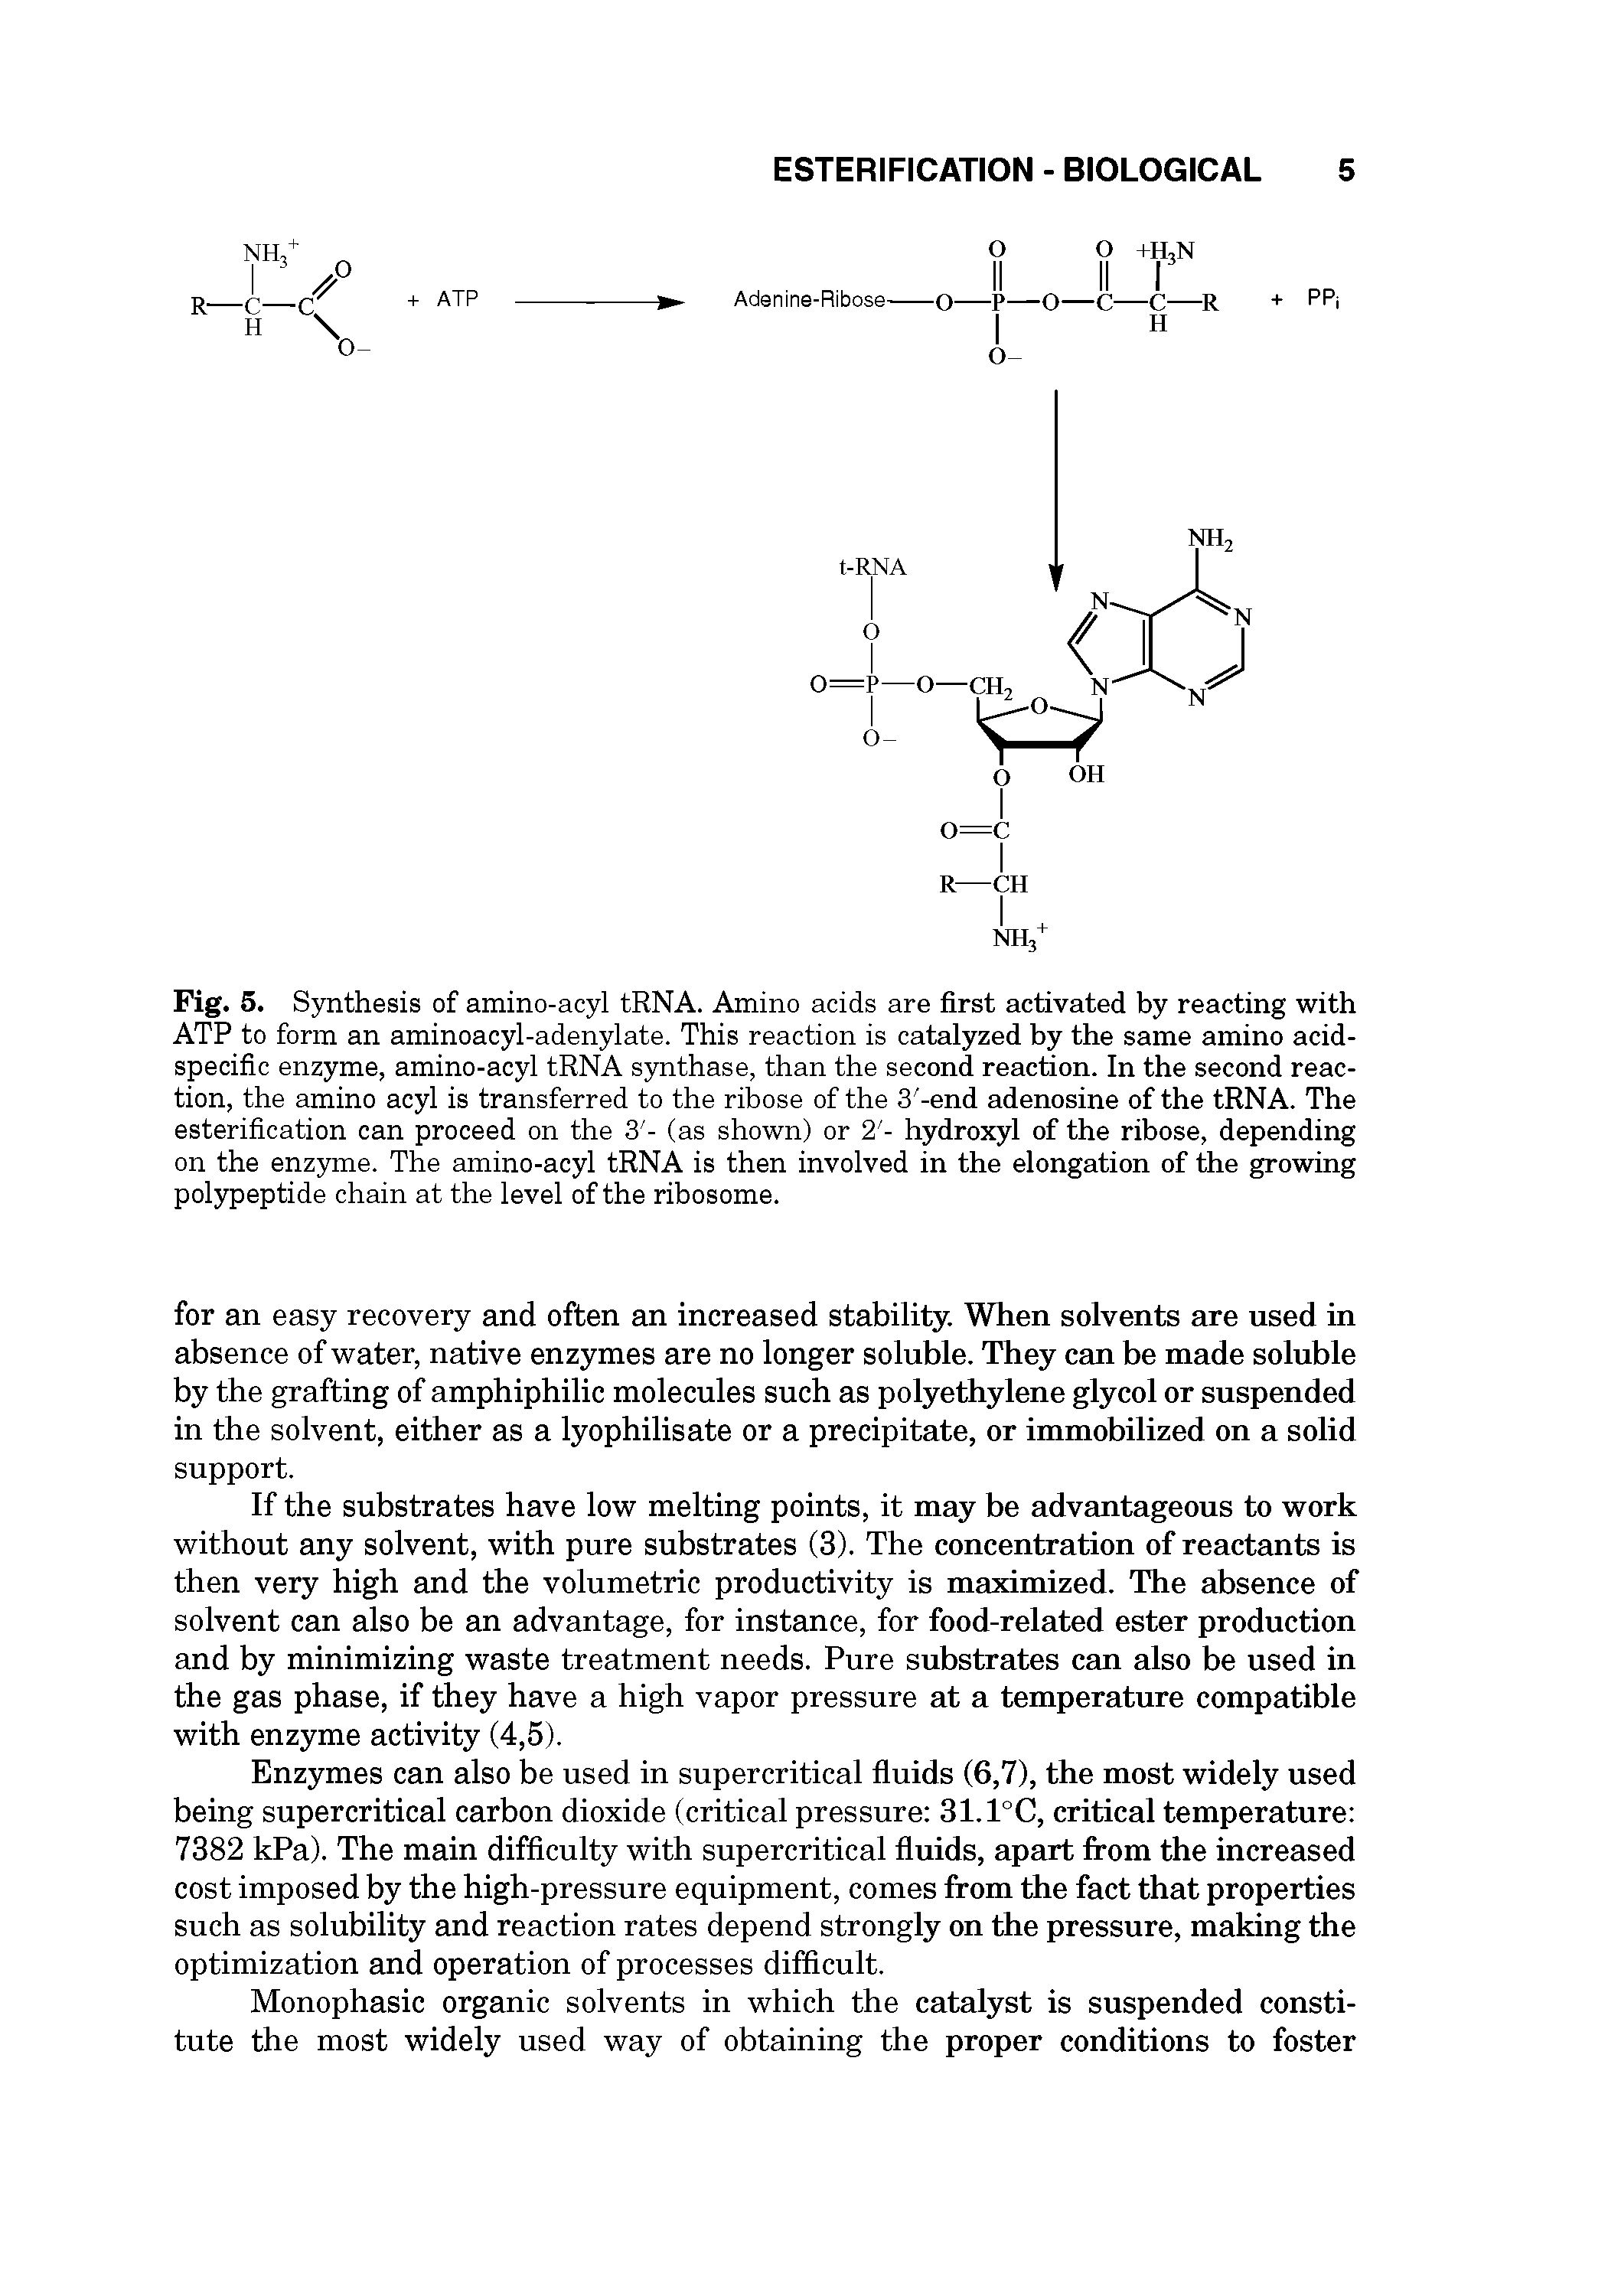 Fig. 5. Synthesis of amino-acyl tRNA. Amino acids are first activated by reacting with ATP to form an aminoacyl-adenylate. This reaction is catalyzed by the same amino acid-specific enzyme, amino-acyl tRNA synthase, than the second reaction. In the second reaction, the amino acyl is transferred to the ribose of the 3 -end adenosine of the tRNA. The esterification can proceed on the 3 - (as shown) or 2 - hydroxyl of the ribose, depending on the enzyme. The amino-acyl tRNA is then involved in the elongation of the growing polypeptide chain at the level of the ribosome.